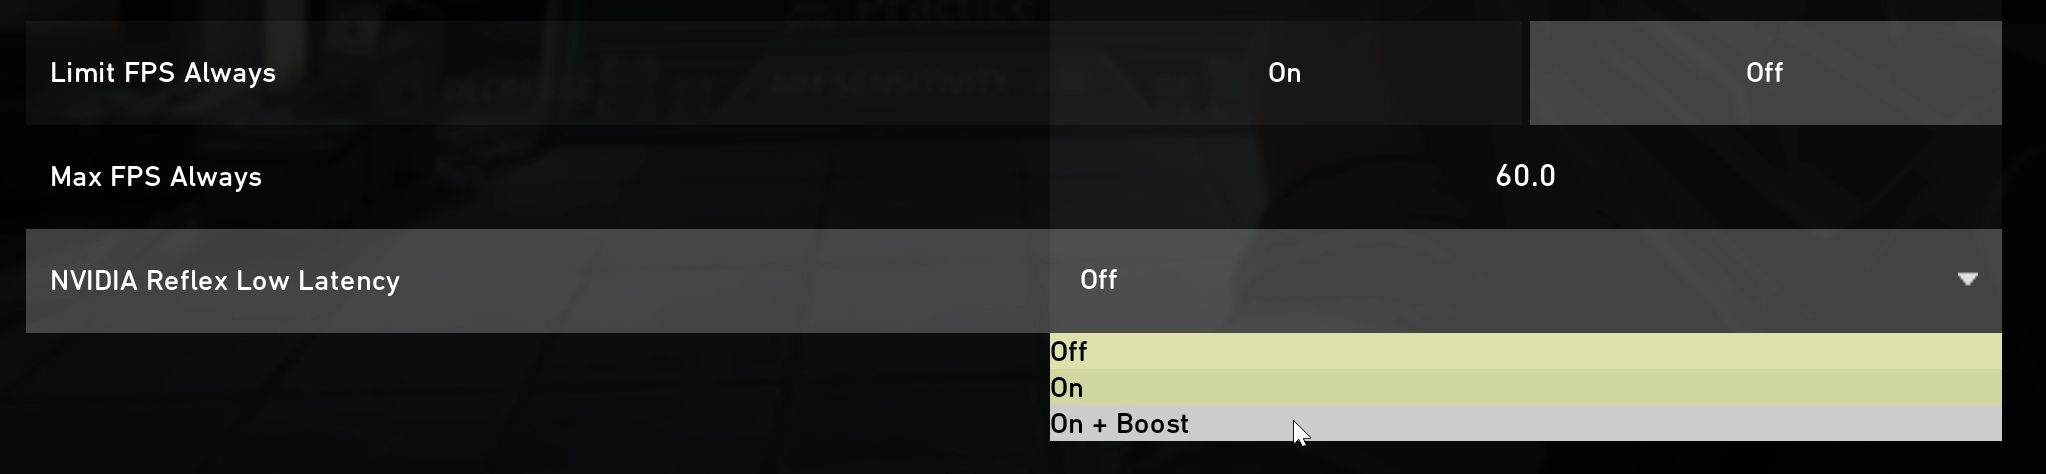 nvidia control panel low latency mode